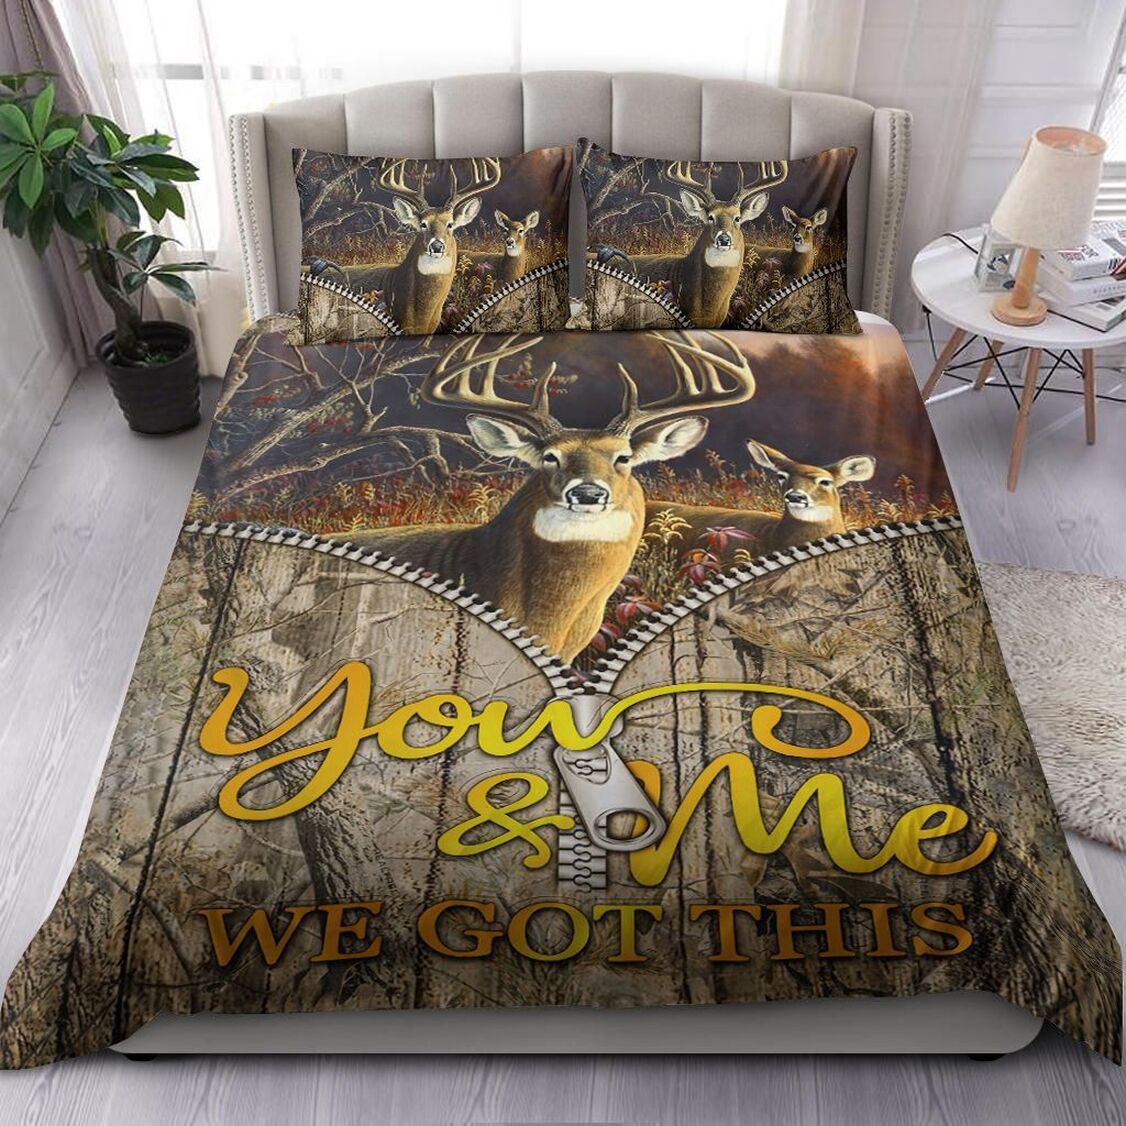 You And Me We Got This Deer Hunting Quilt Bedding Set - Deer Zipper King Queen Twin Throw Size Comfortable